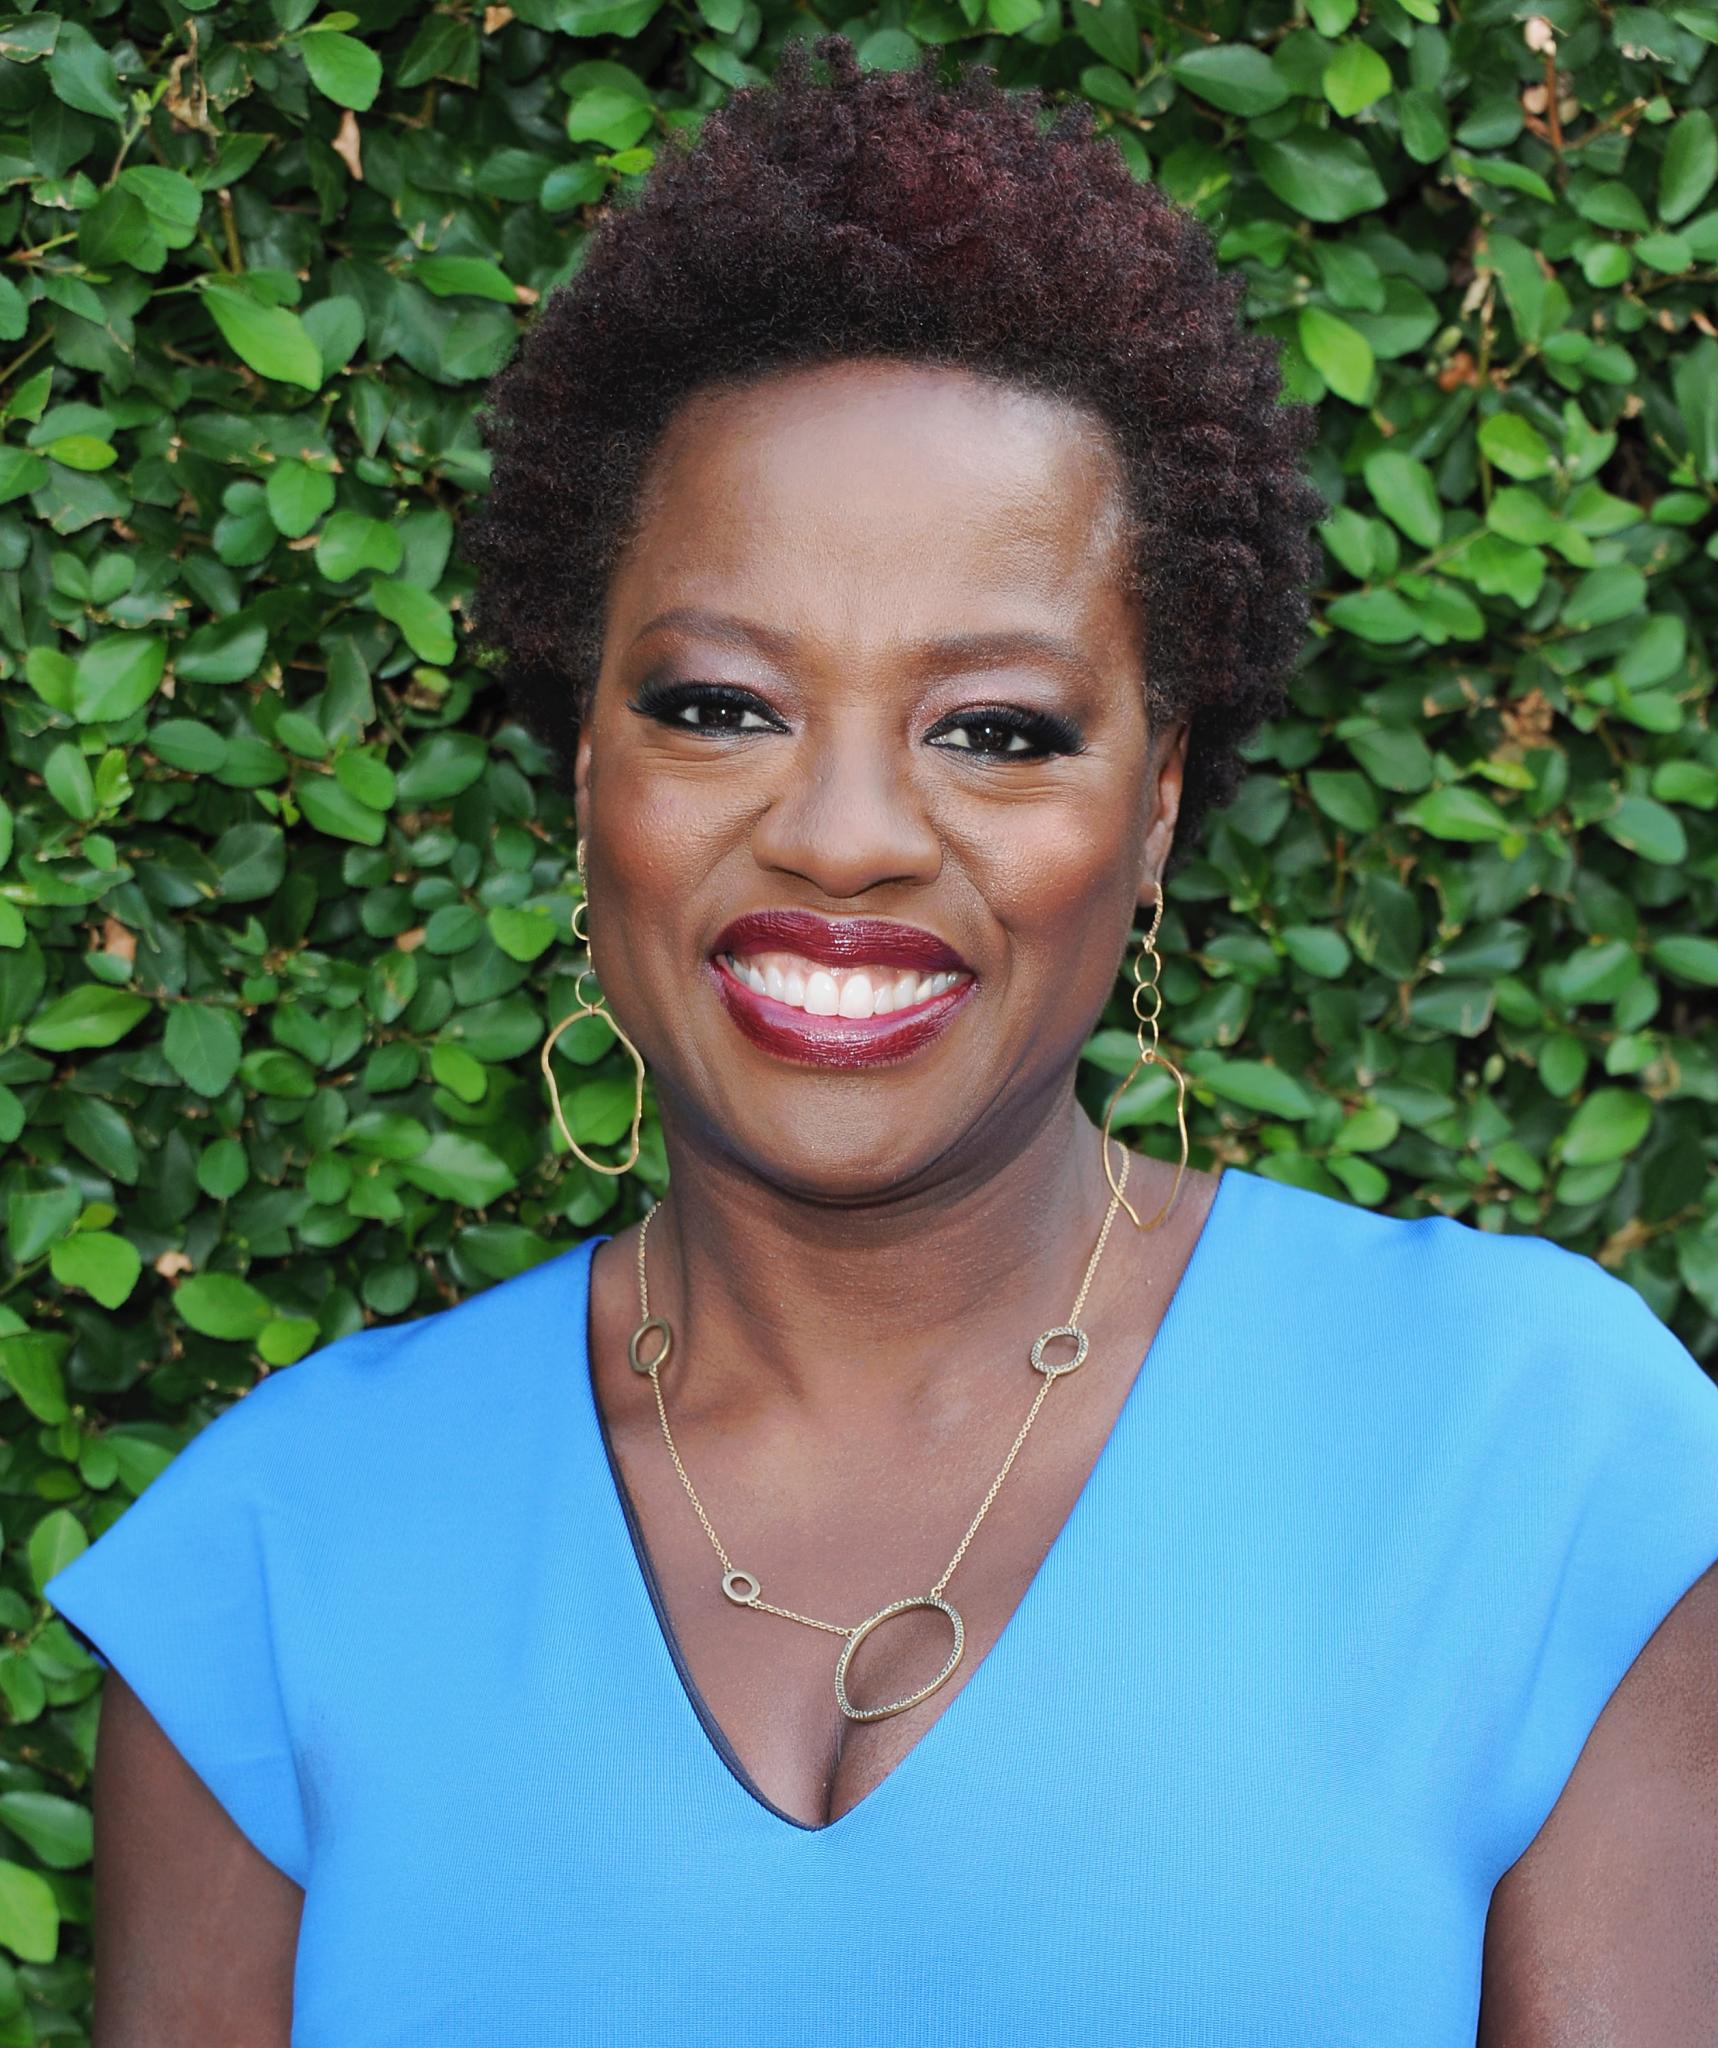 11 Viola Davis Quotes That Prove She is the Black Voice We Need in Hollywood
